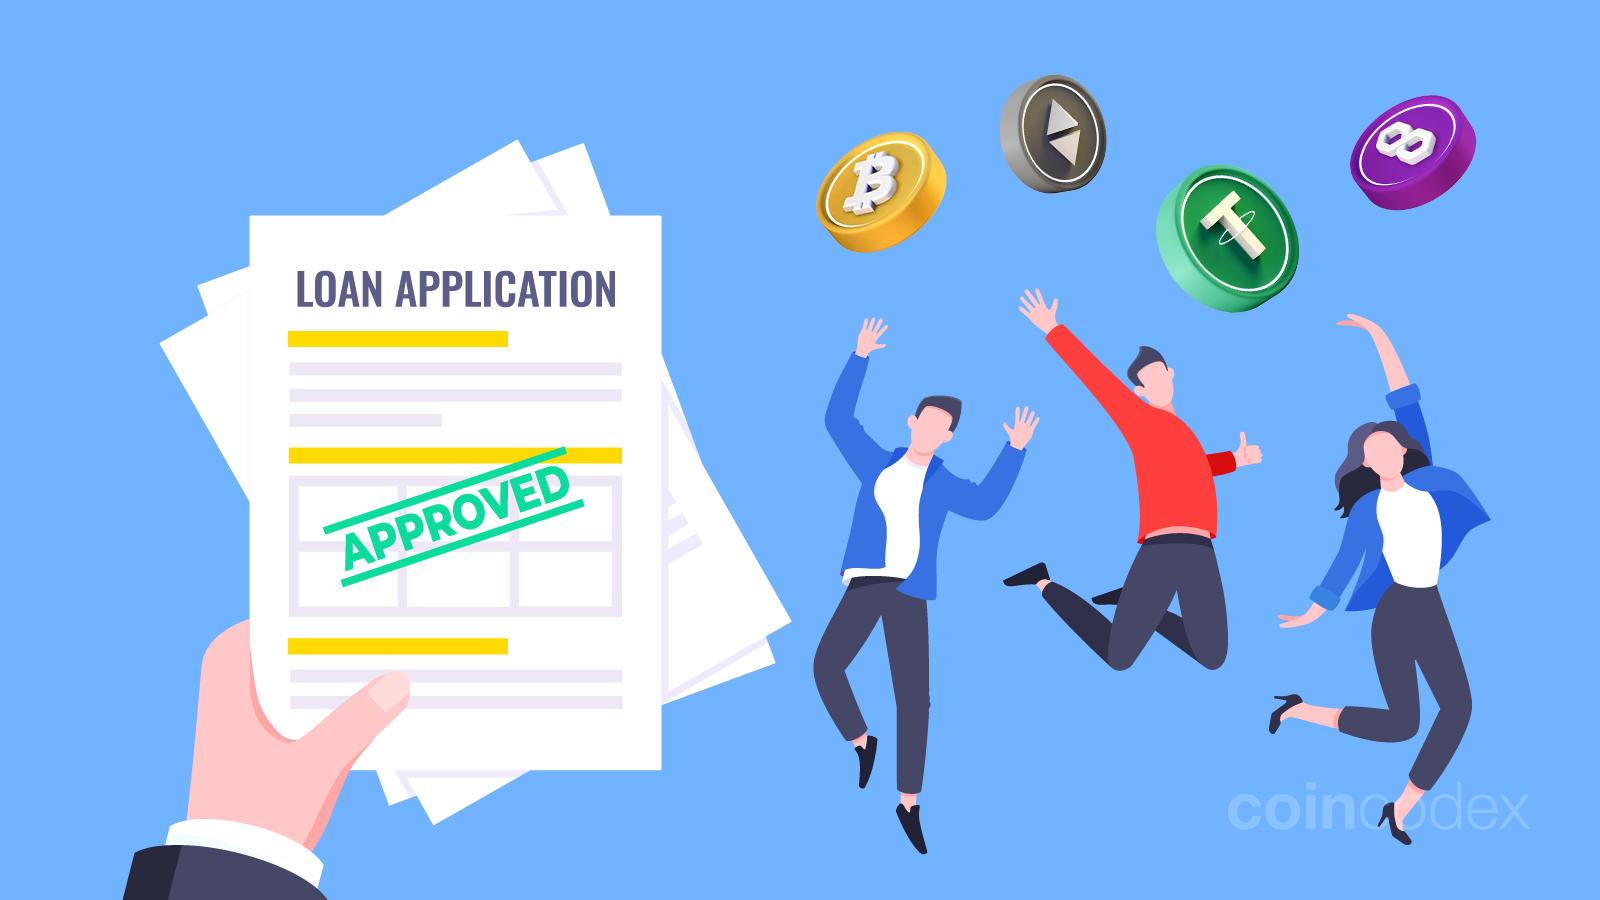 Crypto Loans Without Collateral [Ultimate Guide ] | CoinCodex